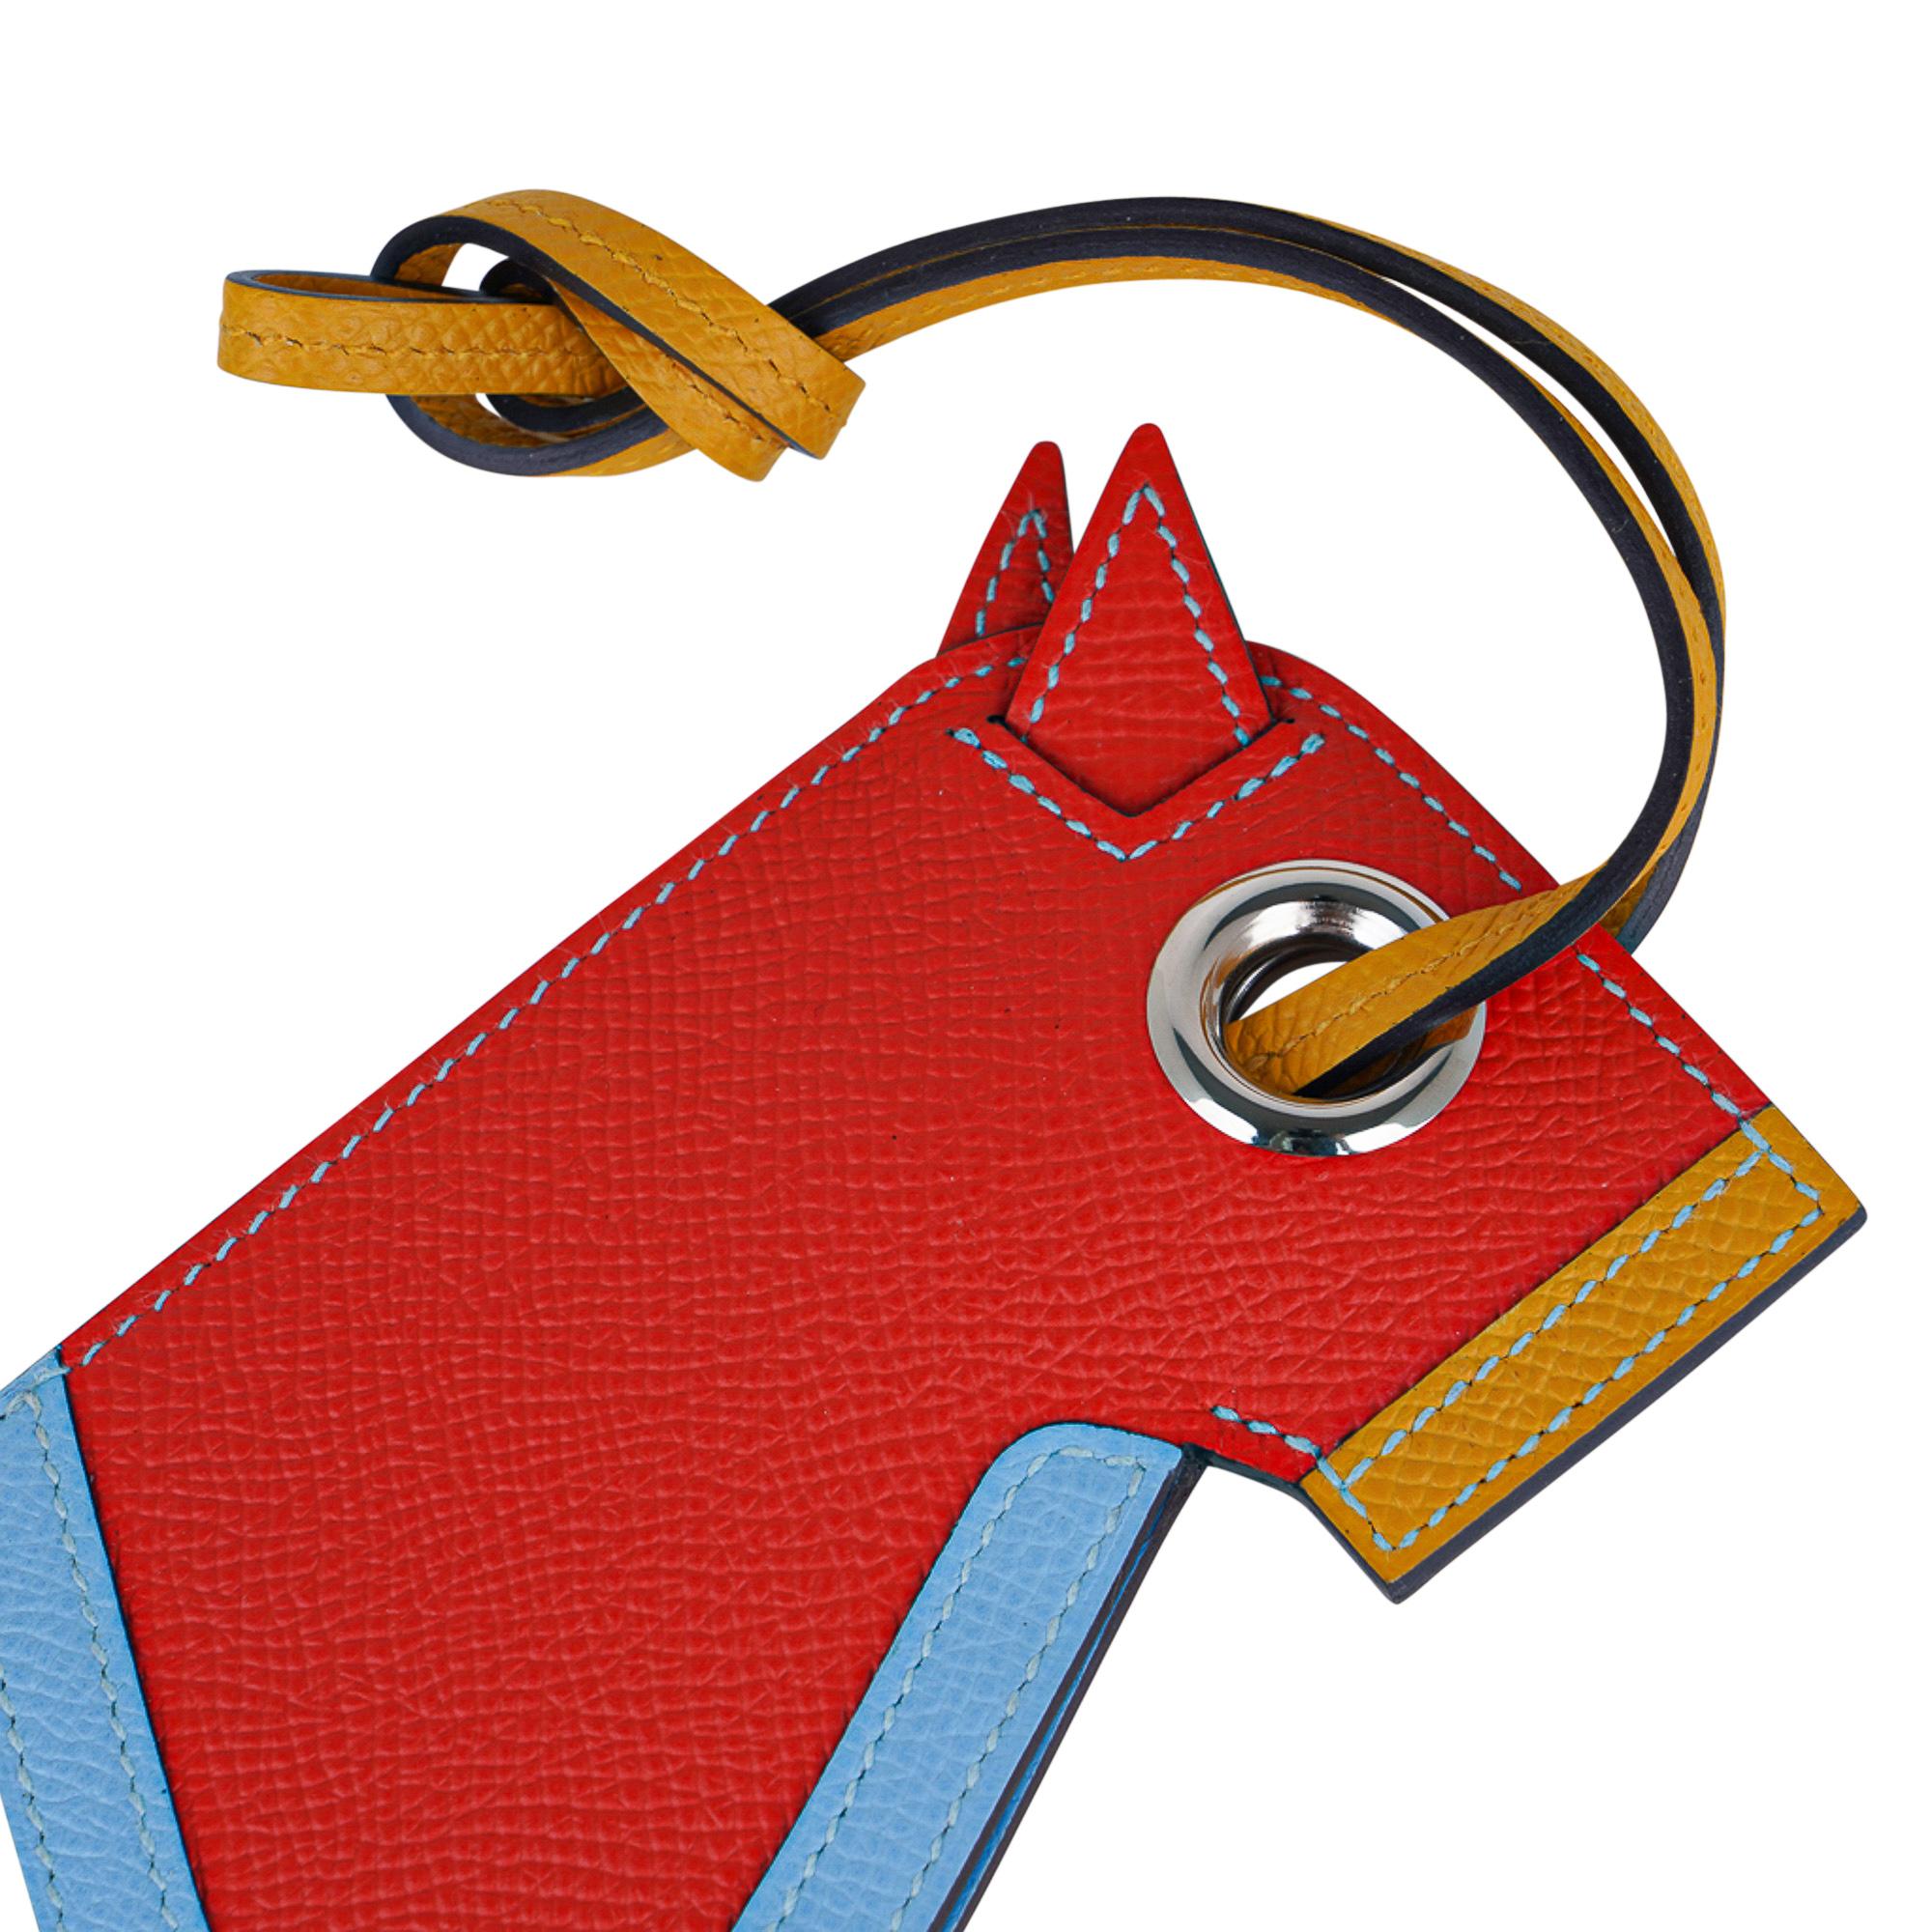 Mightychic offers a guaranteed authentic coveted Hermes Camail Key Ring featured in Capucine,  Jaune Ambre and Bleu Celeste.
A modern take on a horse head crafted in Epsom leather with a hidden key ring.
Charming and playful she easily adorns a